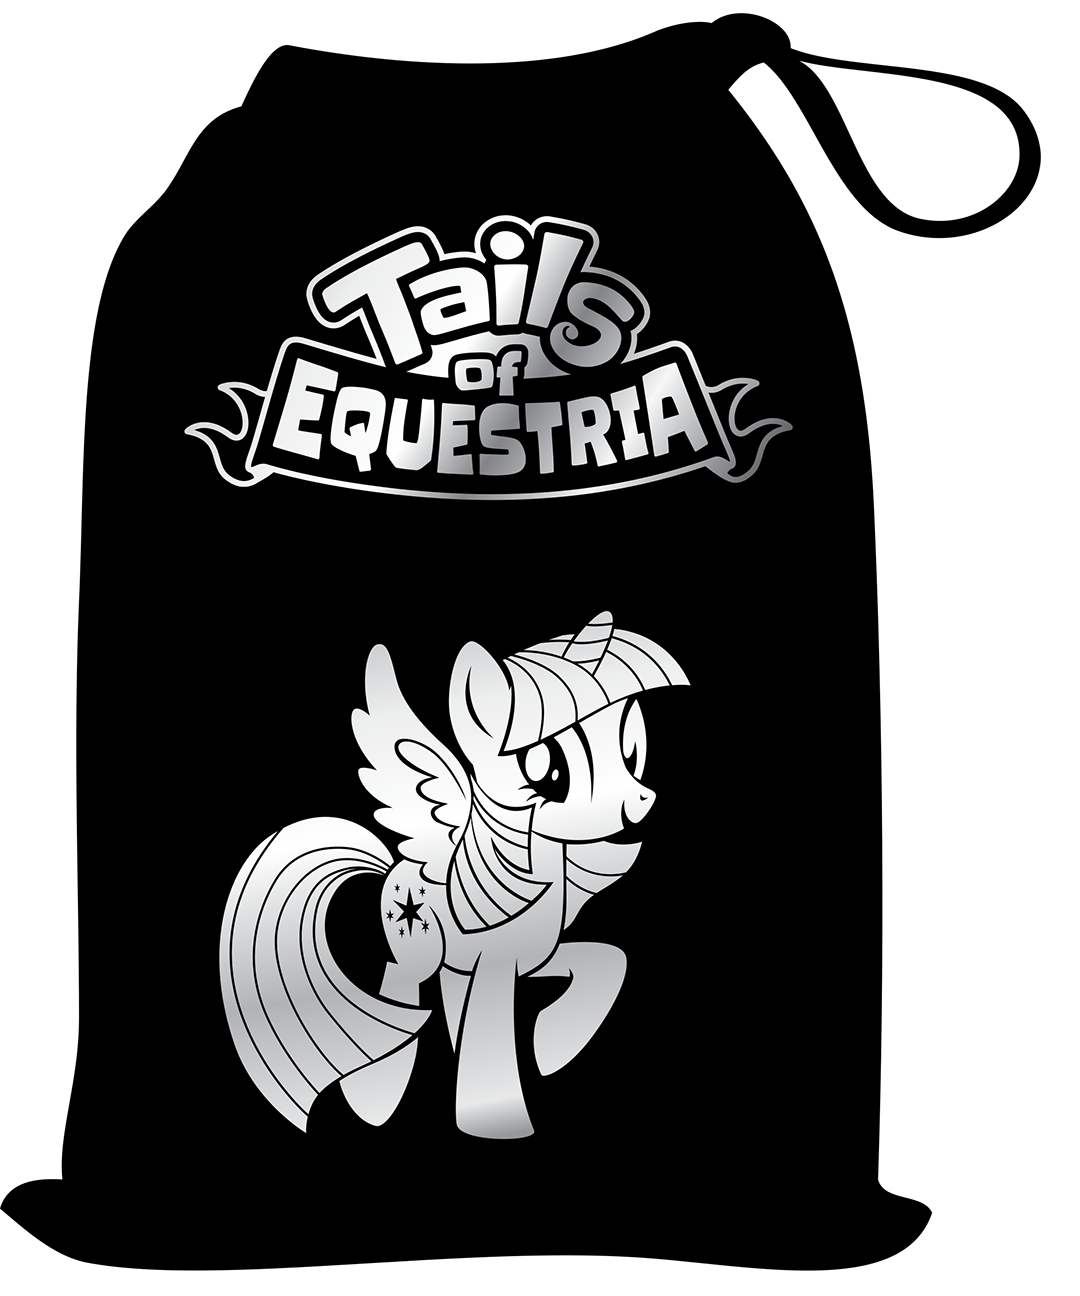 Tokens of Friendship bag for Tails of Equestria by River Horse